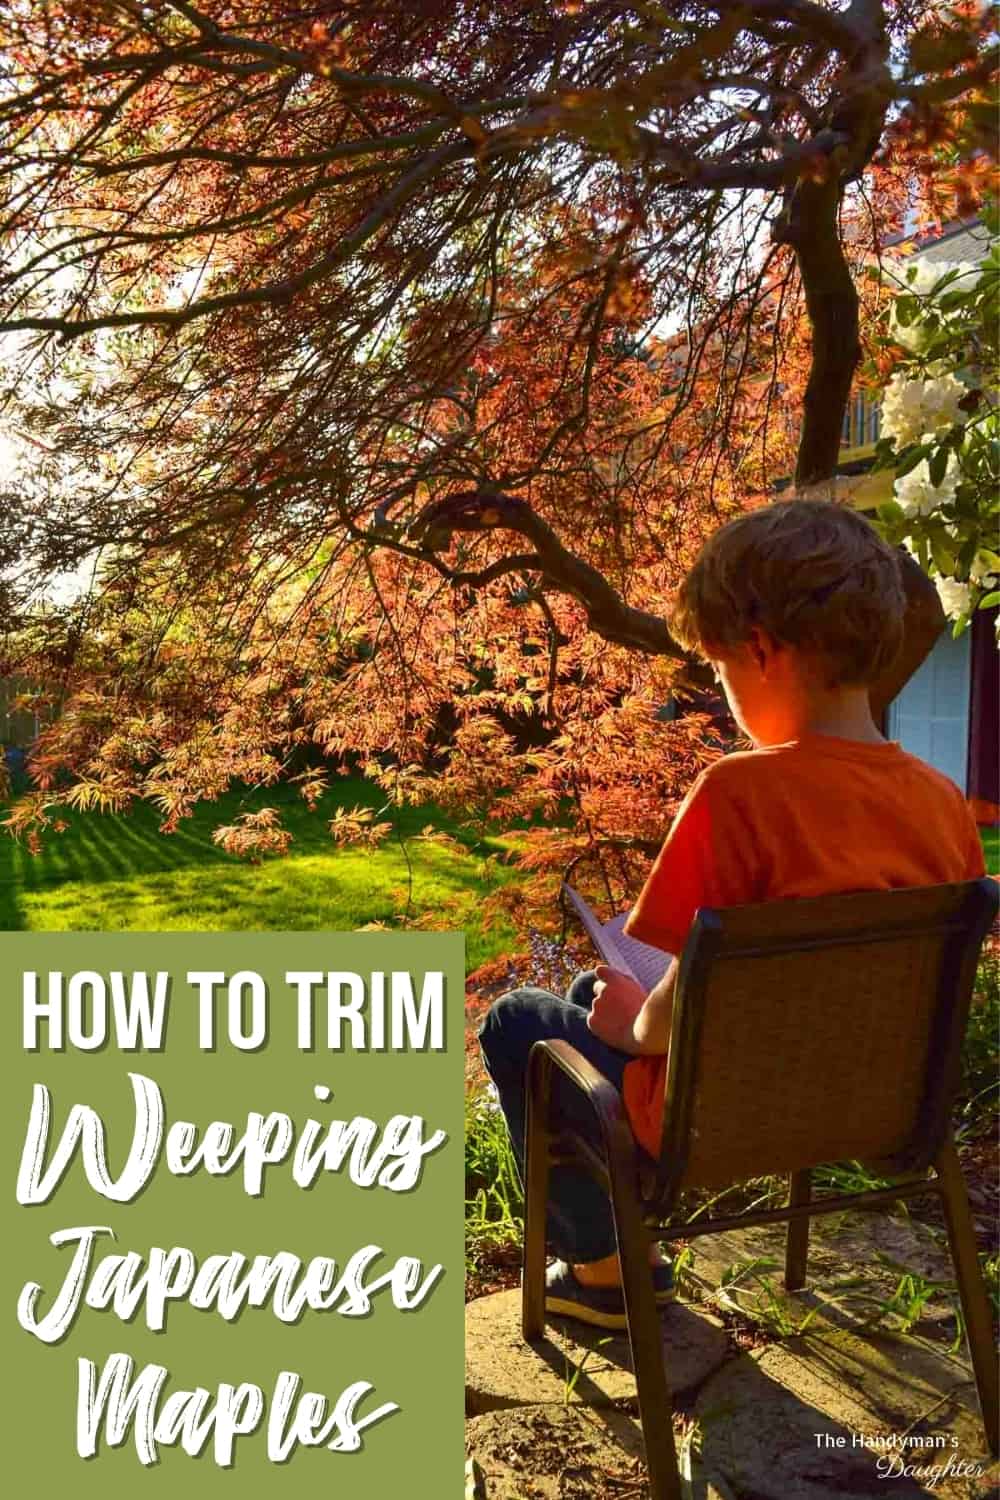 How to trim weeping Japanese maples